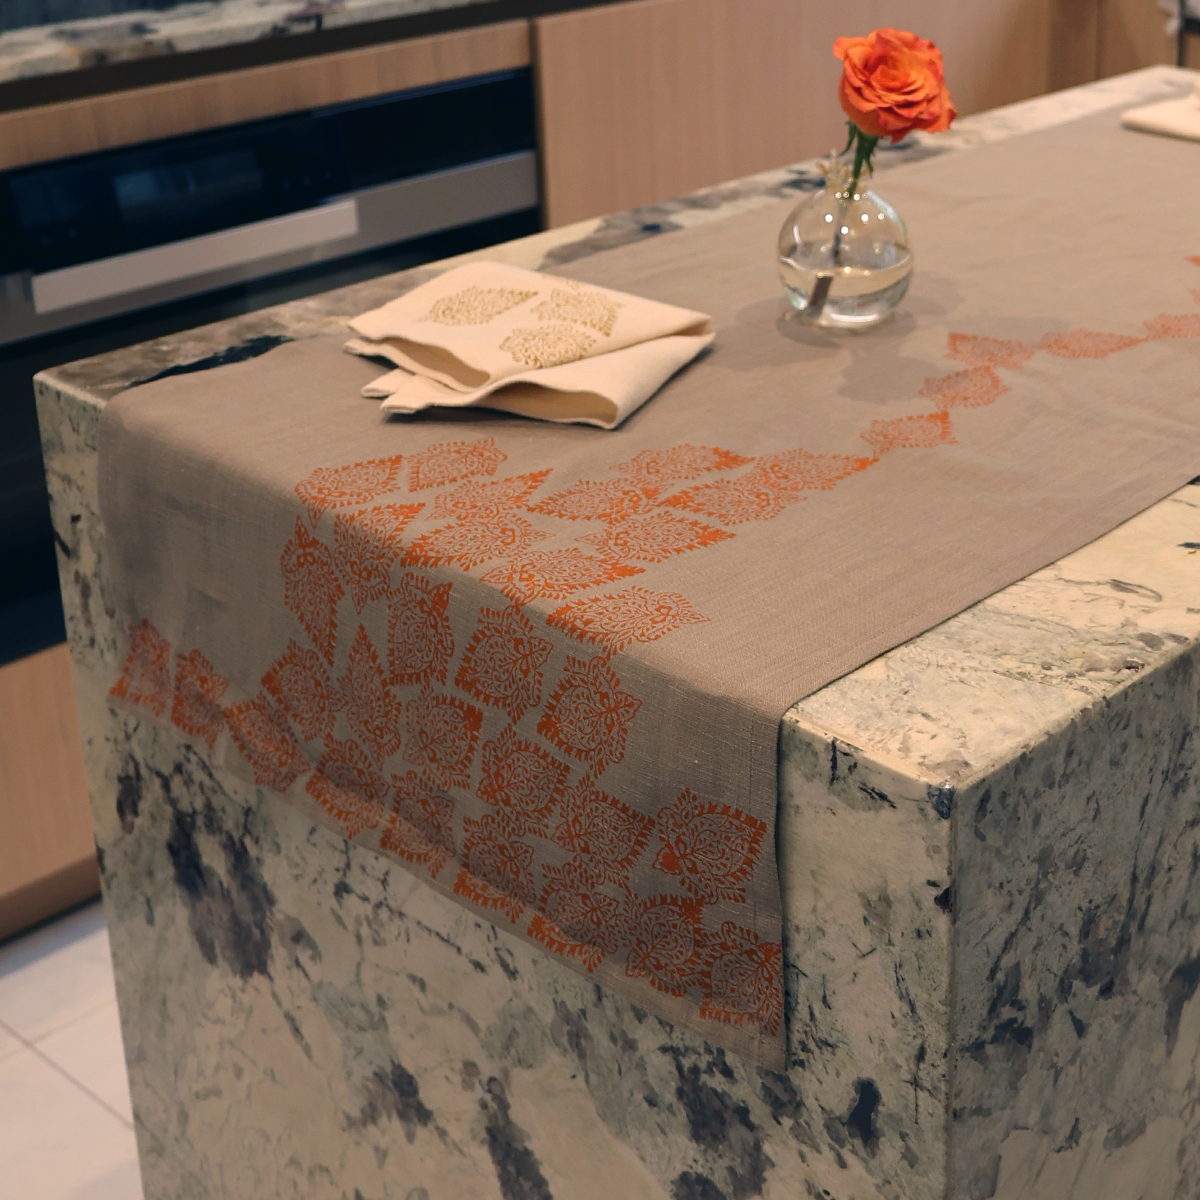 French-designed Table Runner: Bringing Elegance and Ethics to Your Home